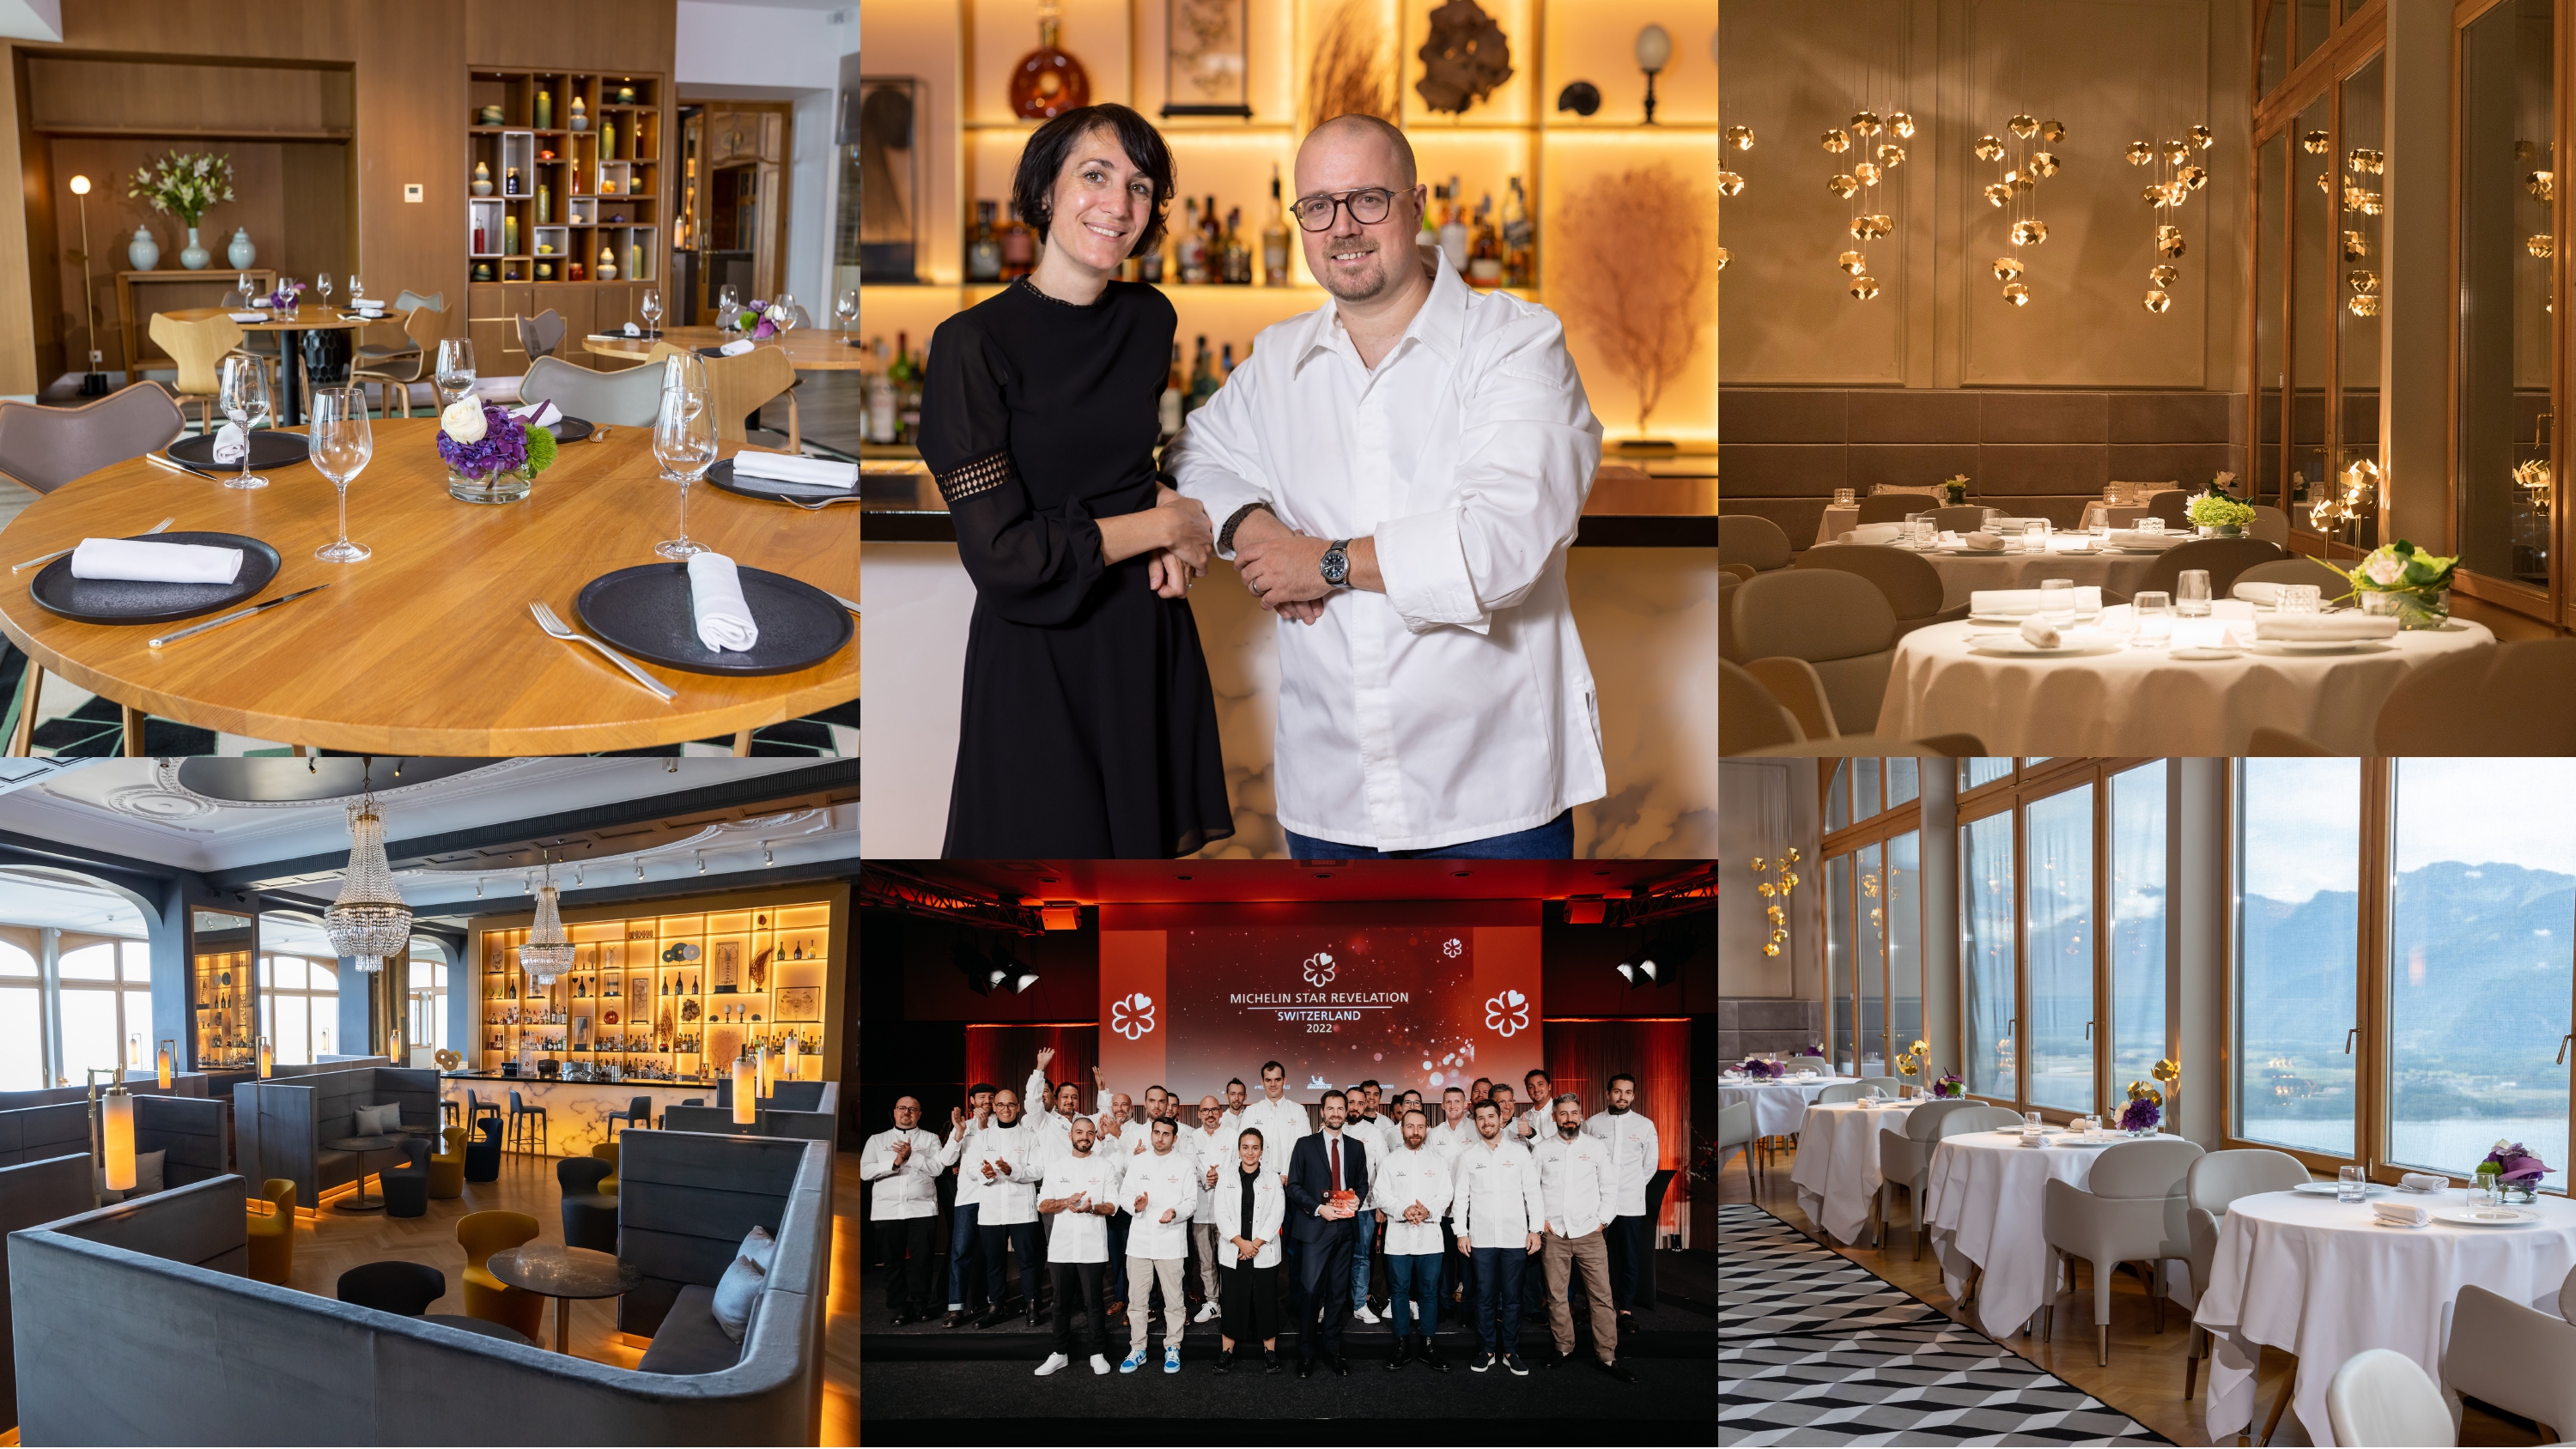 The Michelin Guide awards 1 star and 1 Bib Gourmand overall to  “Maison Décotterd”  in the heart of Glion Institute of Higher Education